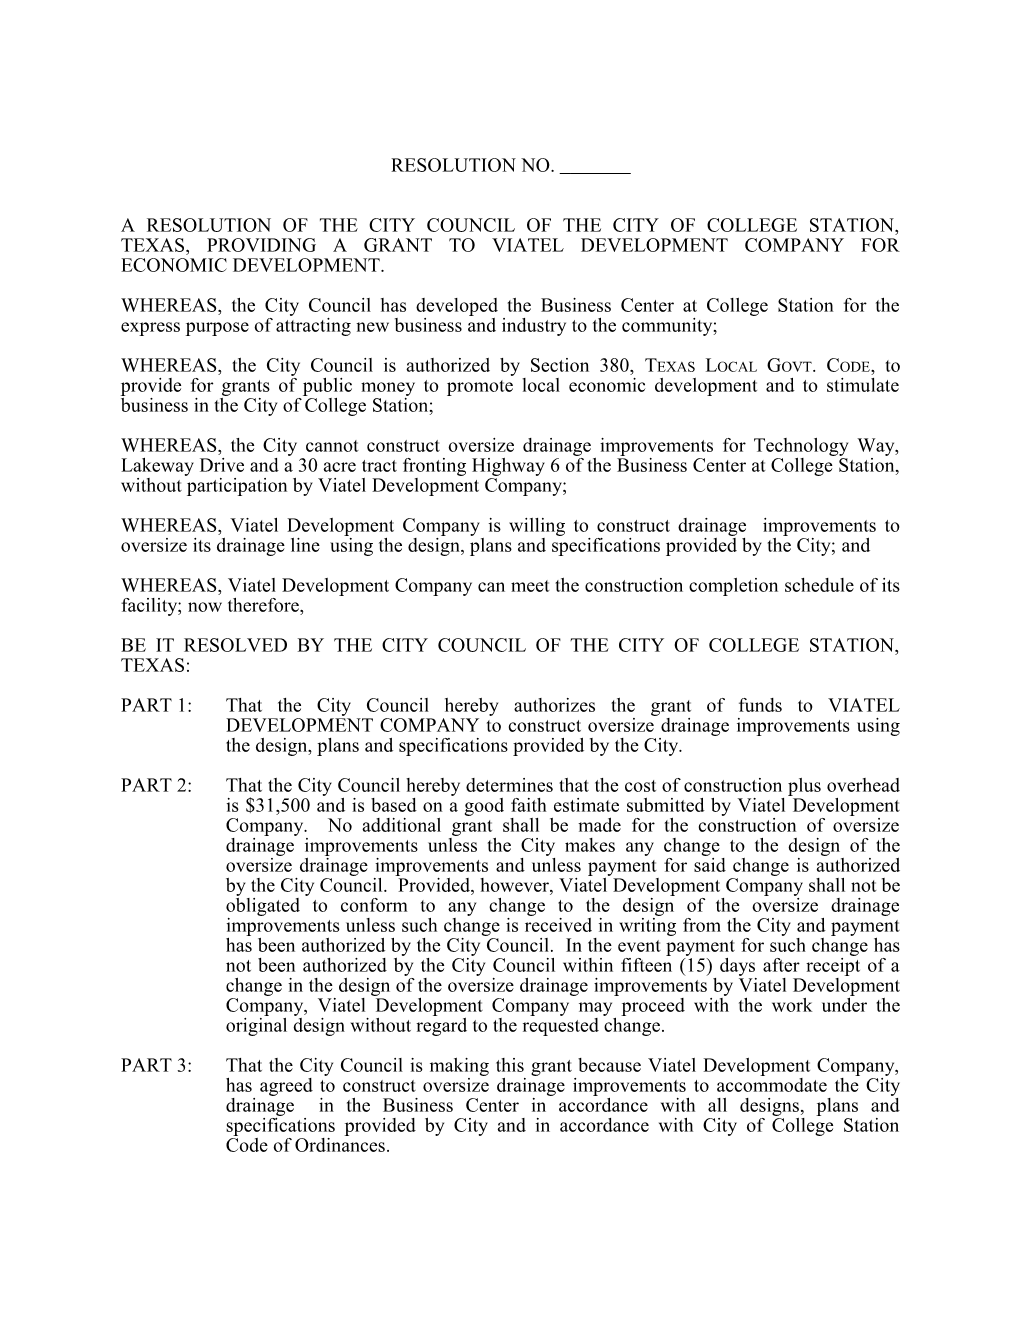 A Resolution of the City Council of the City of College Station, Texas, Providing a Grant